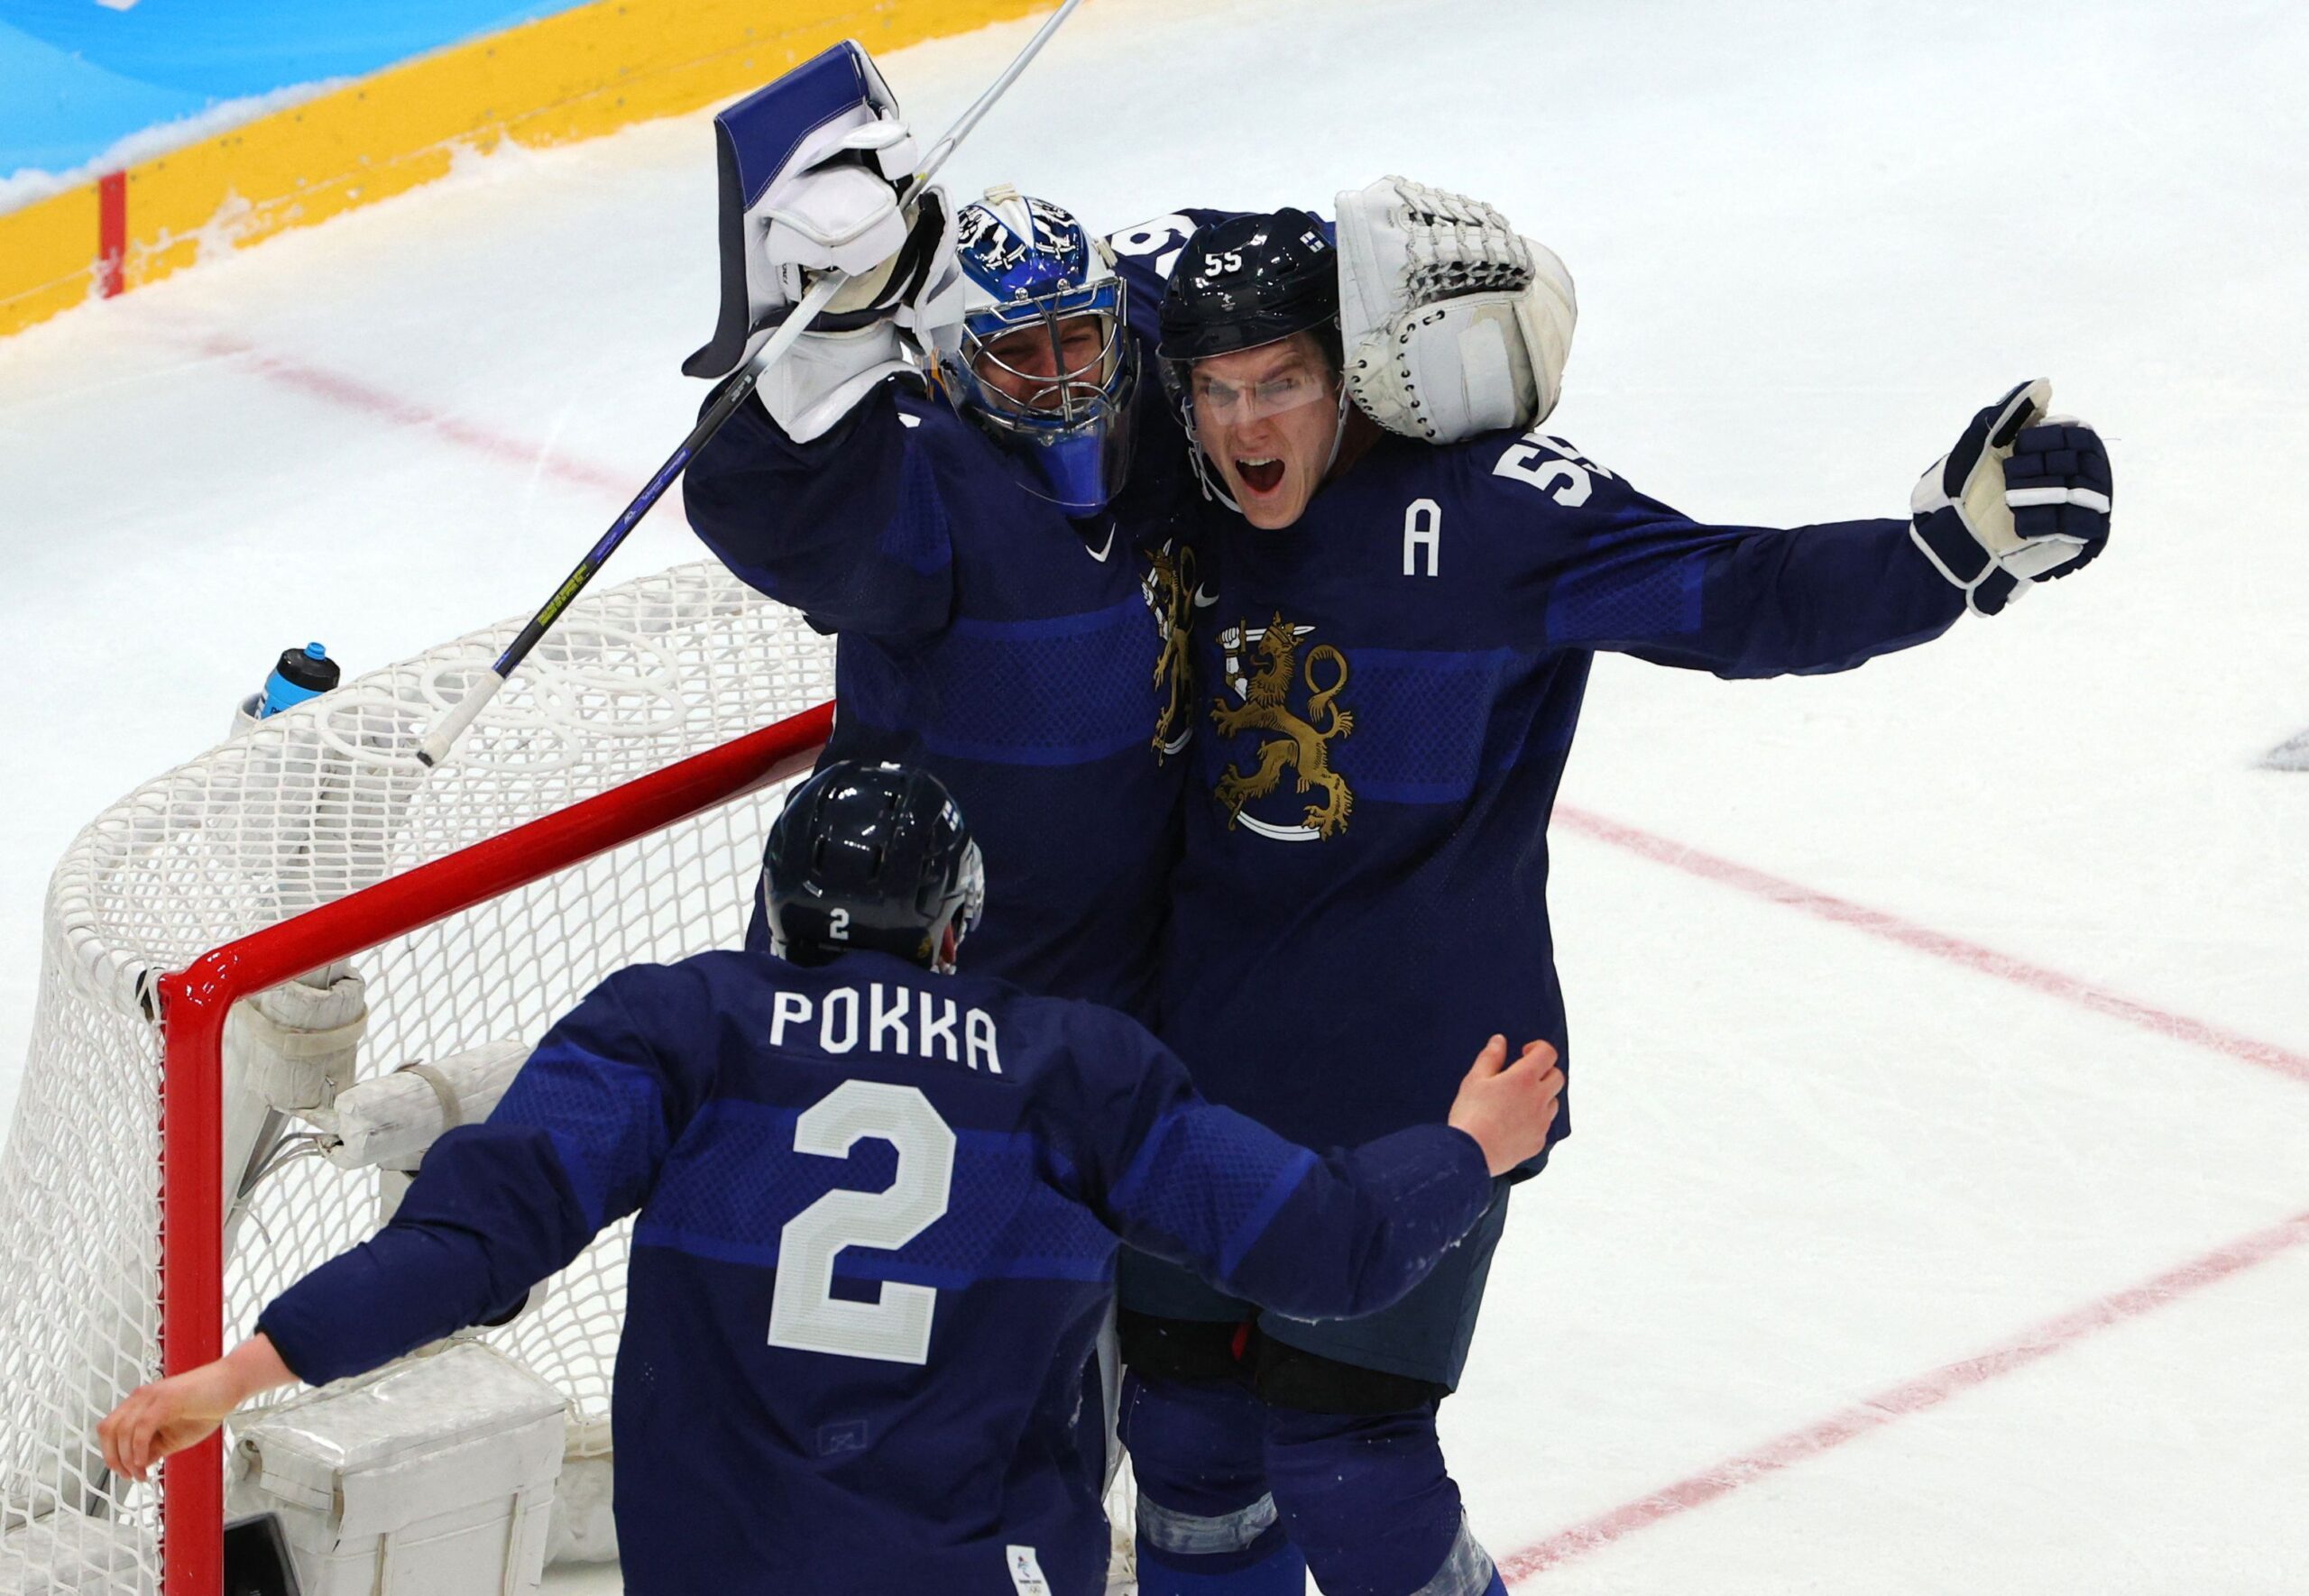 Finland edges ROC in hockey to clinch last gold in Beijing Olympics